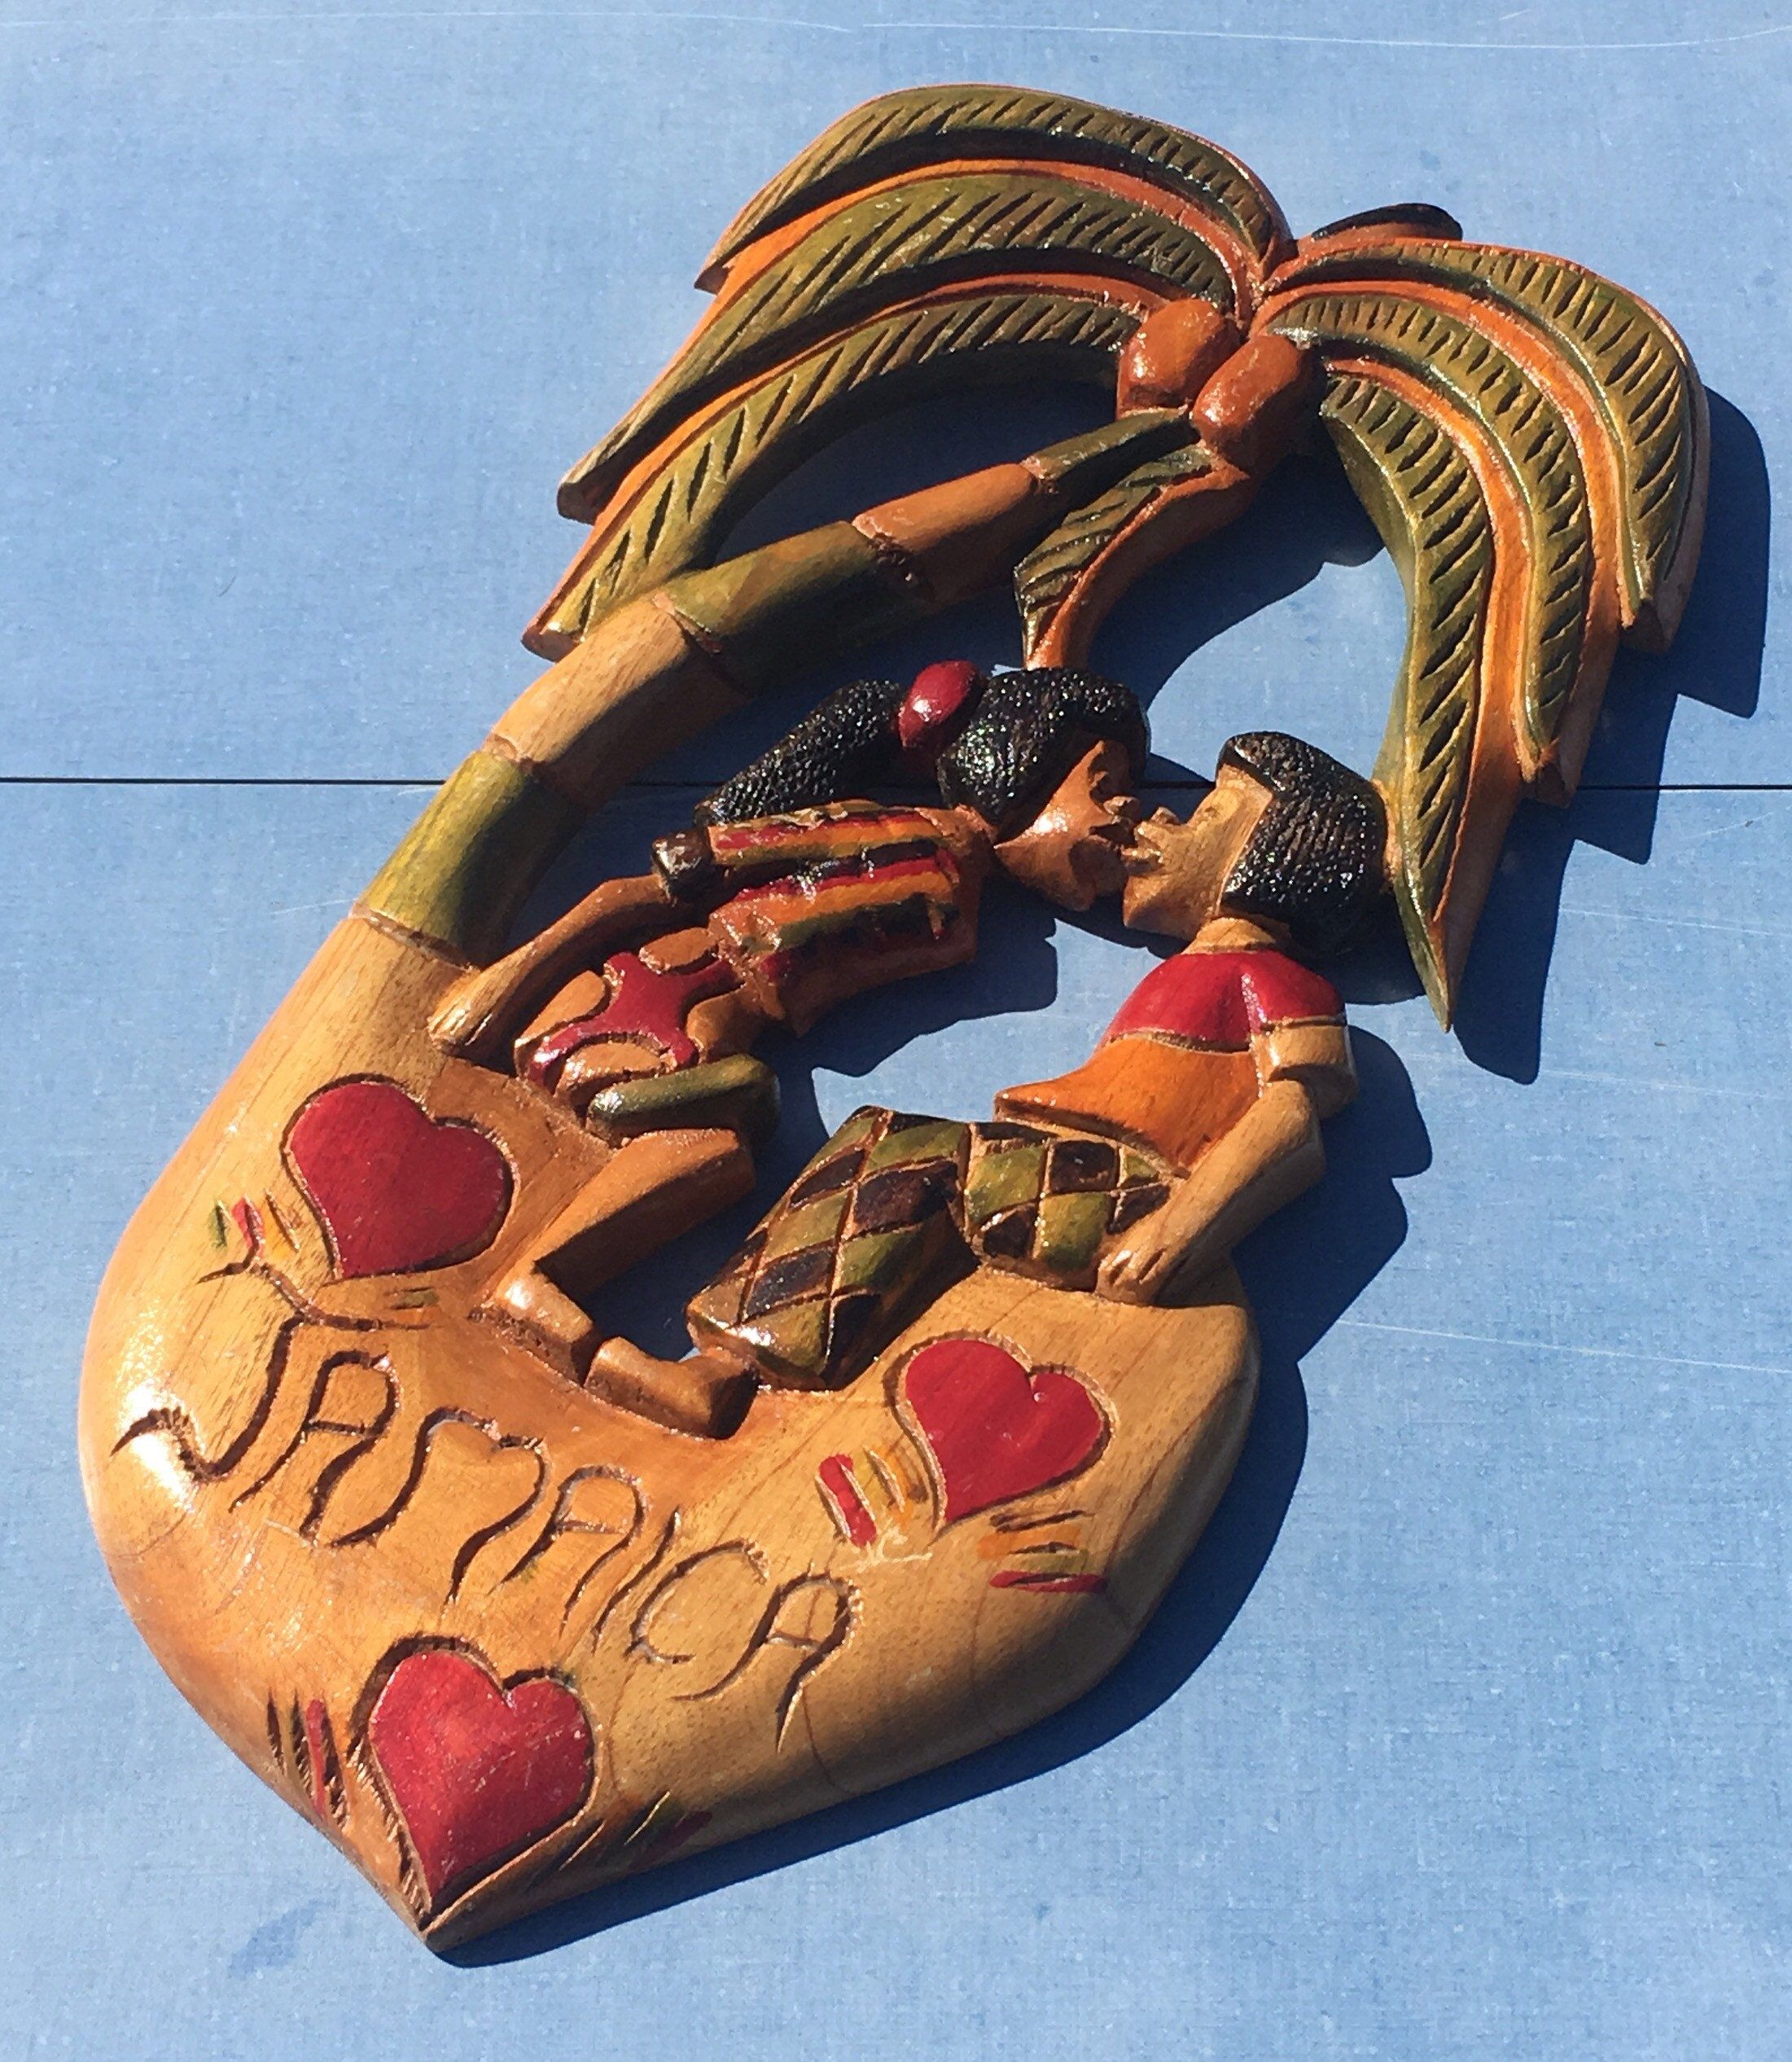 Vintage Wood Carving, Tropical Lovers Wall Decor, Carved Pertaining To Retro Wood Wall Art (View 13 of 15)